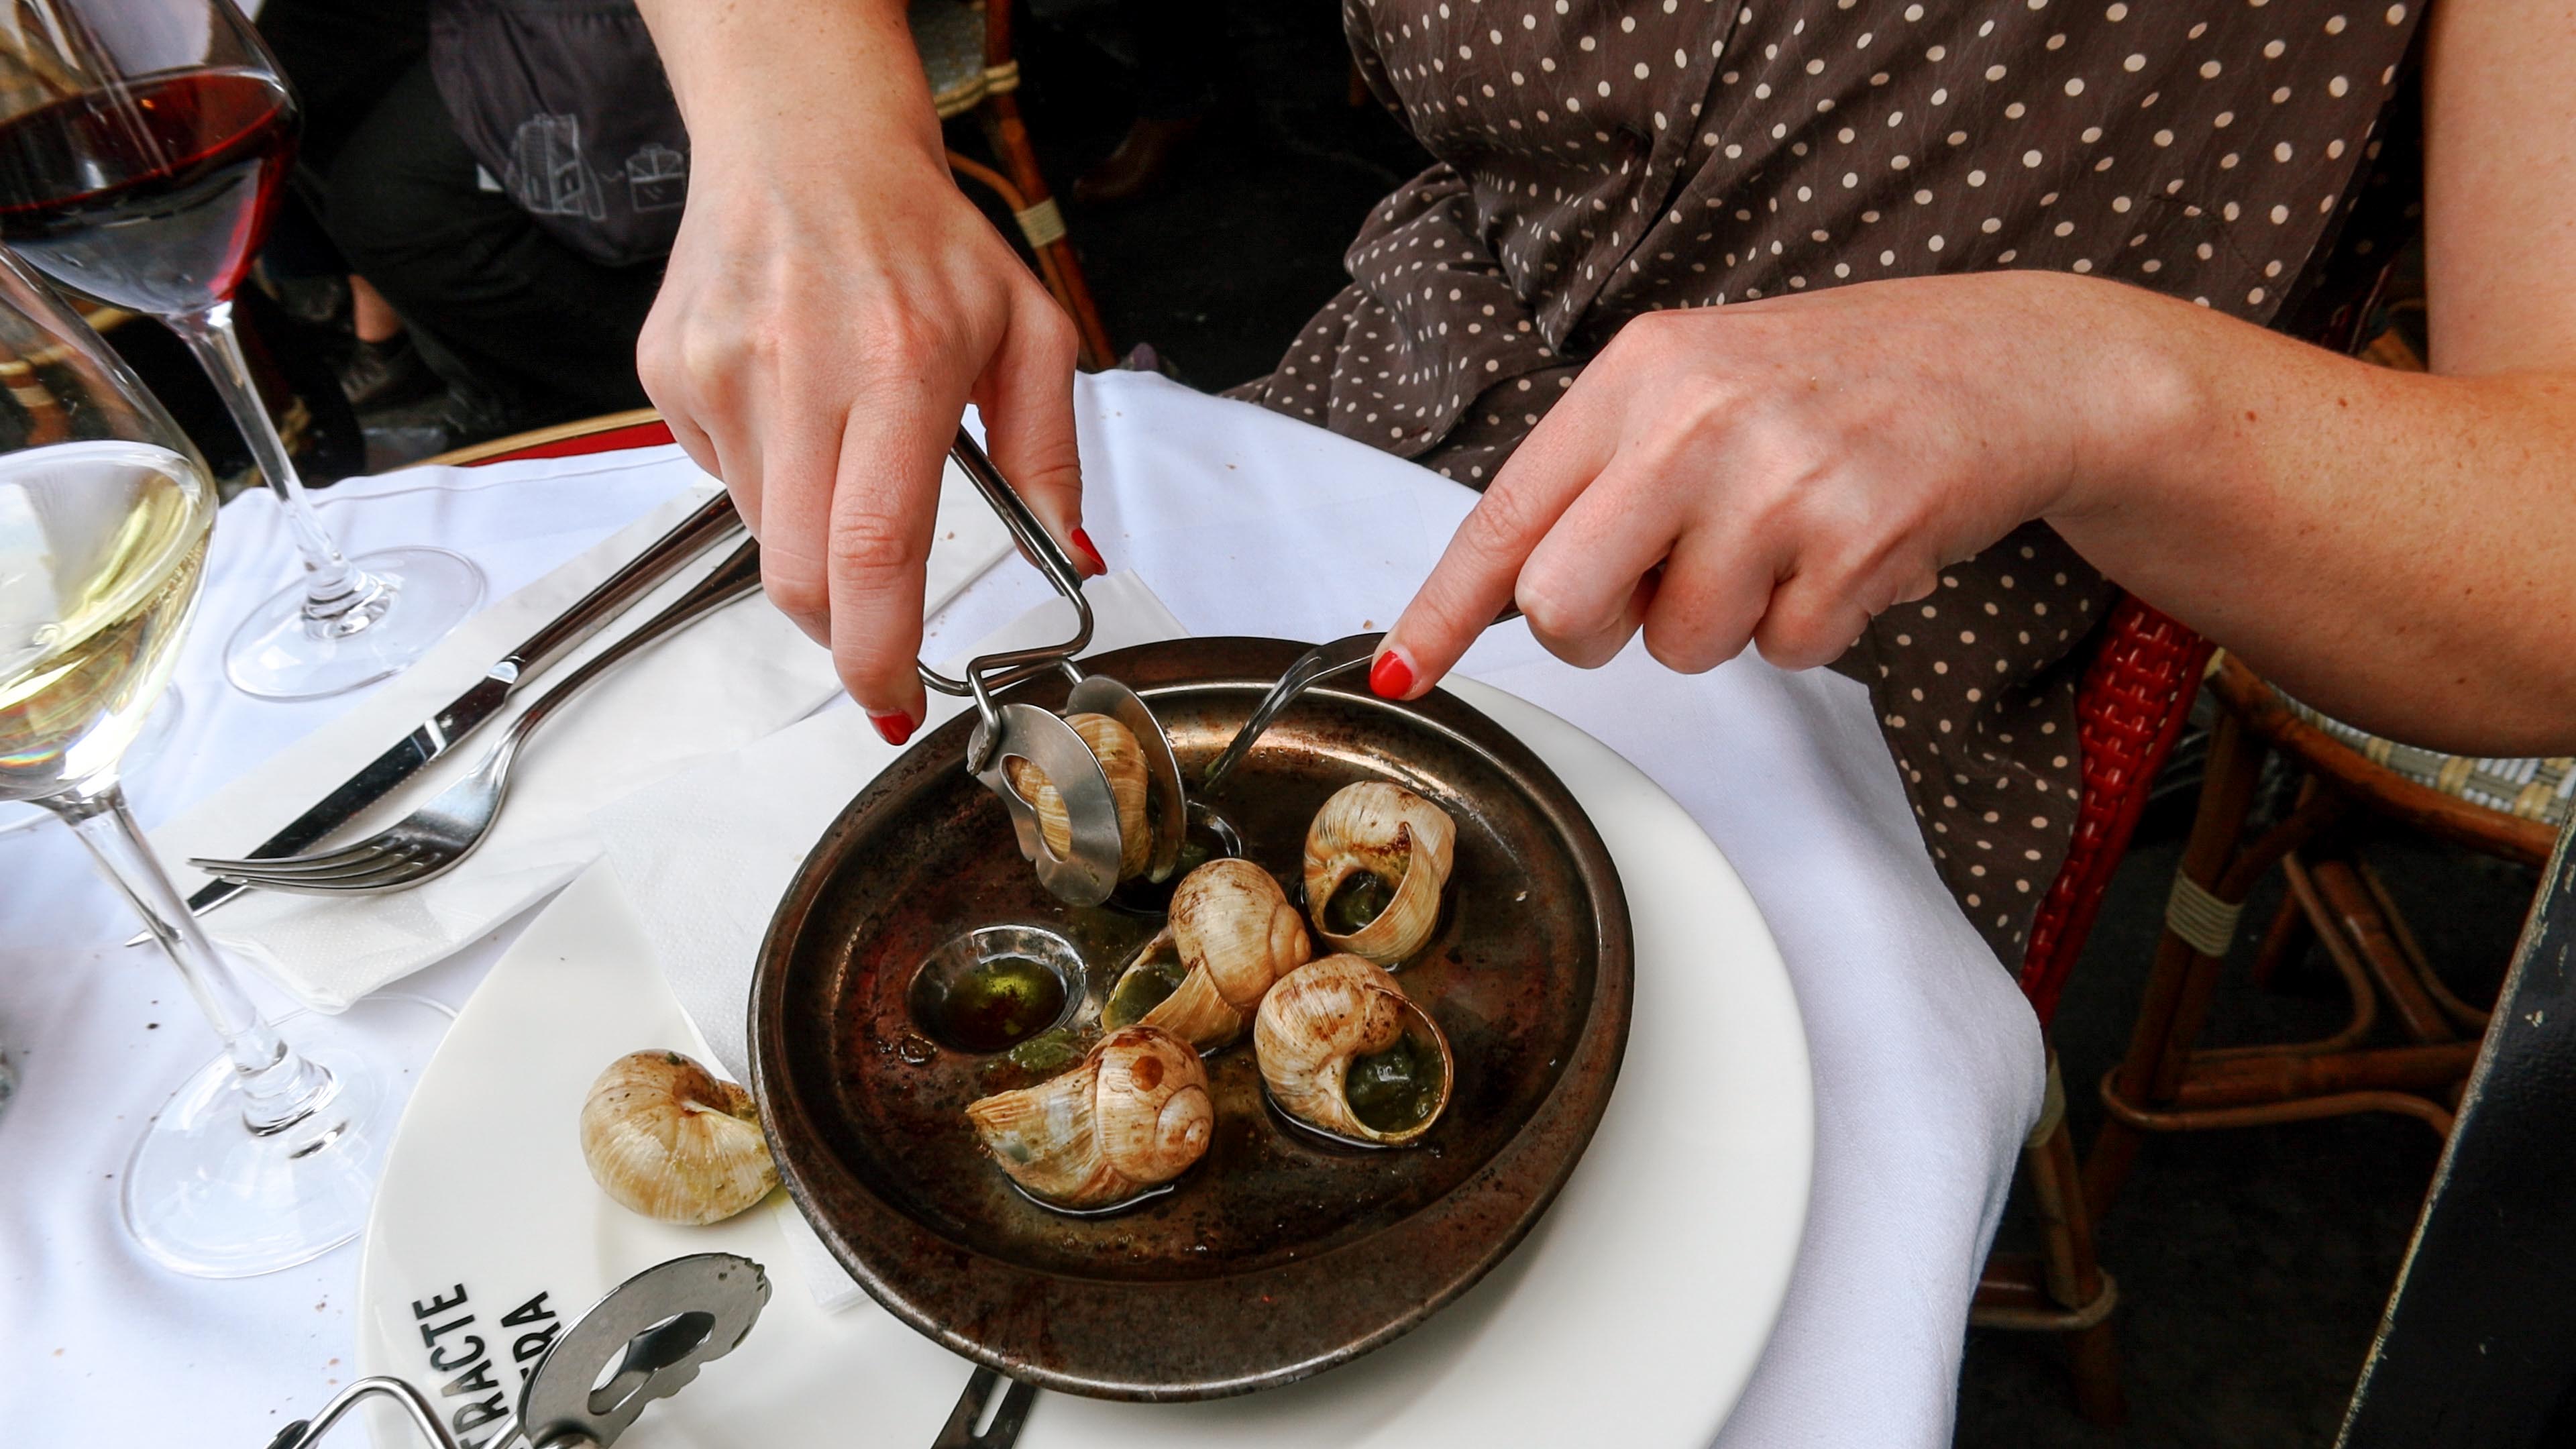 Trying Snails (Escargot) for the First Time in Paris